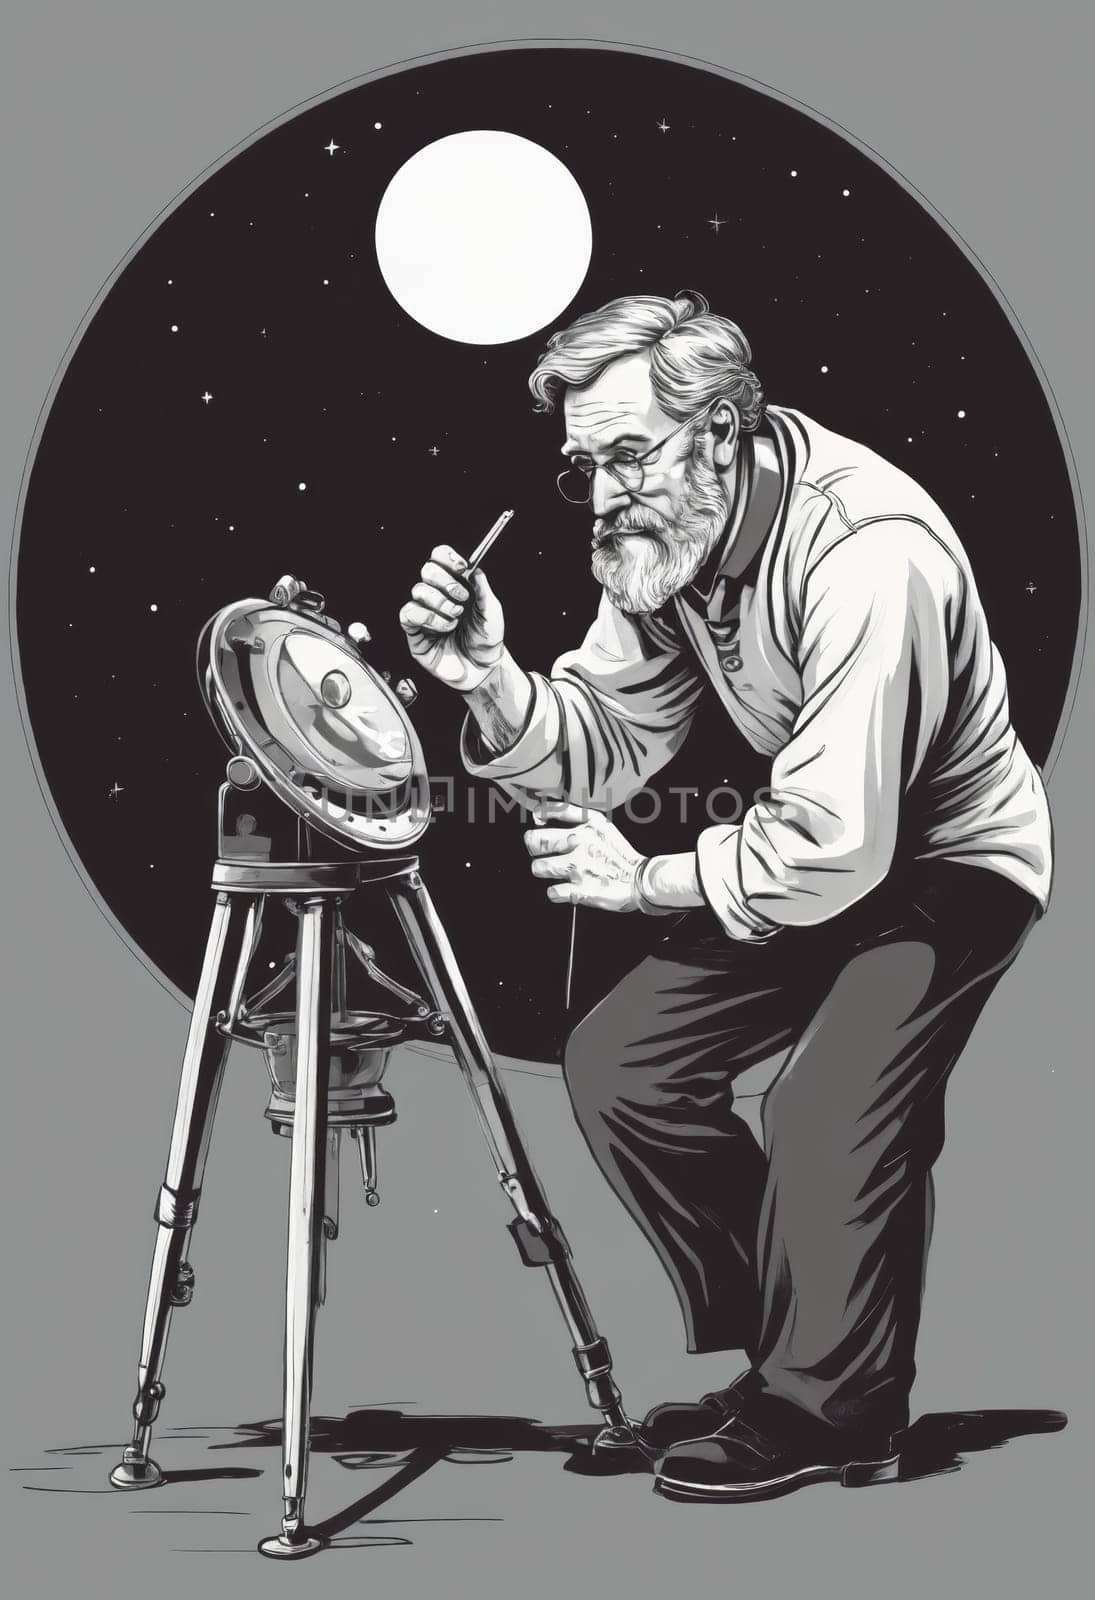 Night Sky Exploration: Star Observer Using an Antique Telescope by Andre1ns